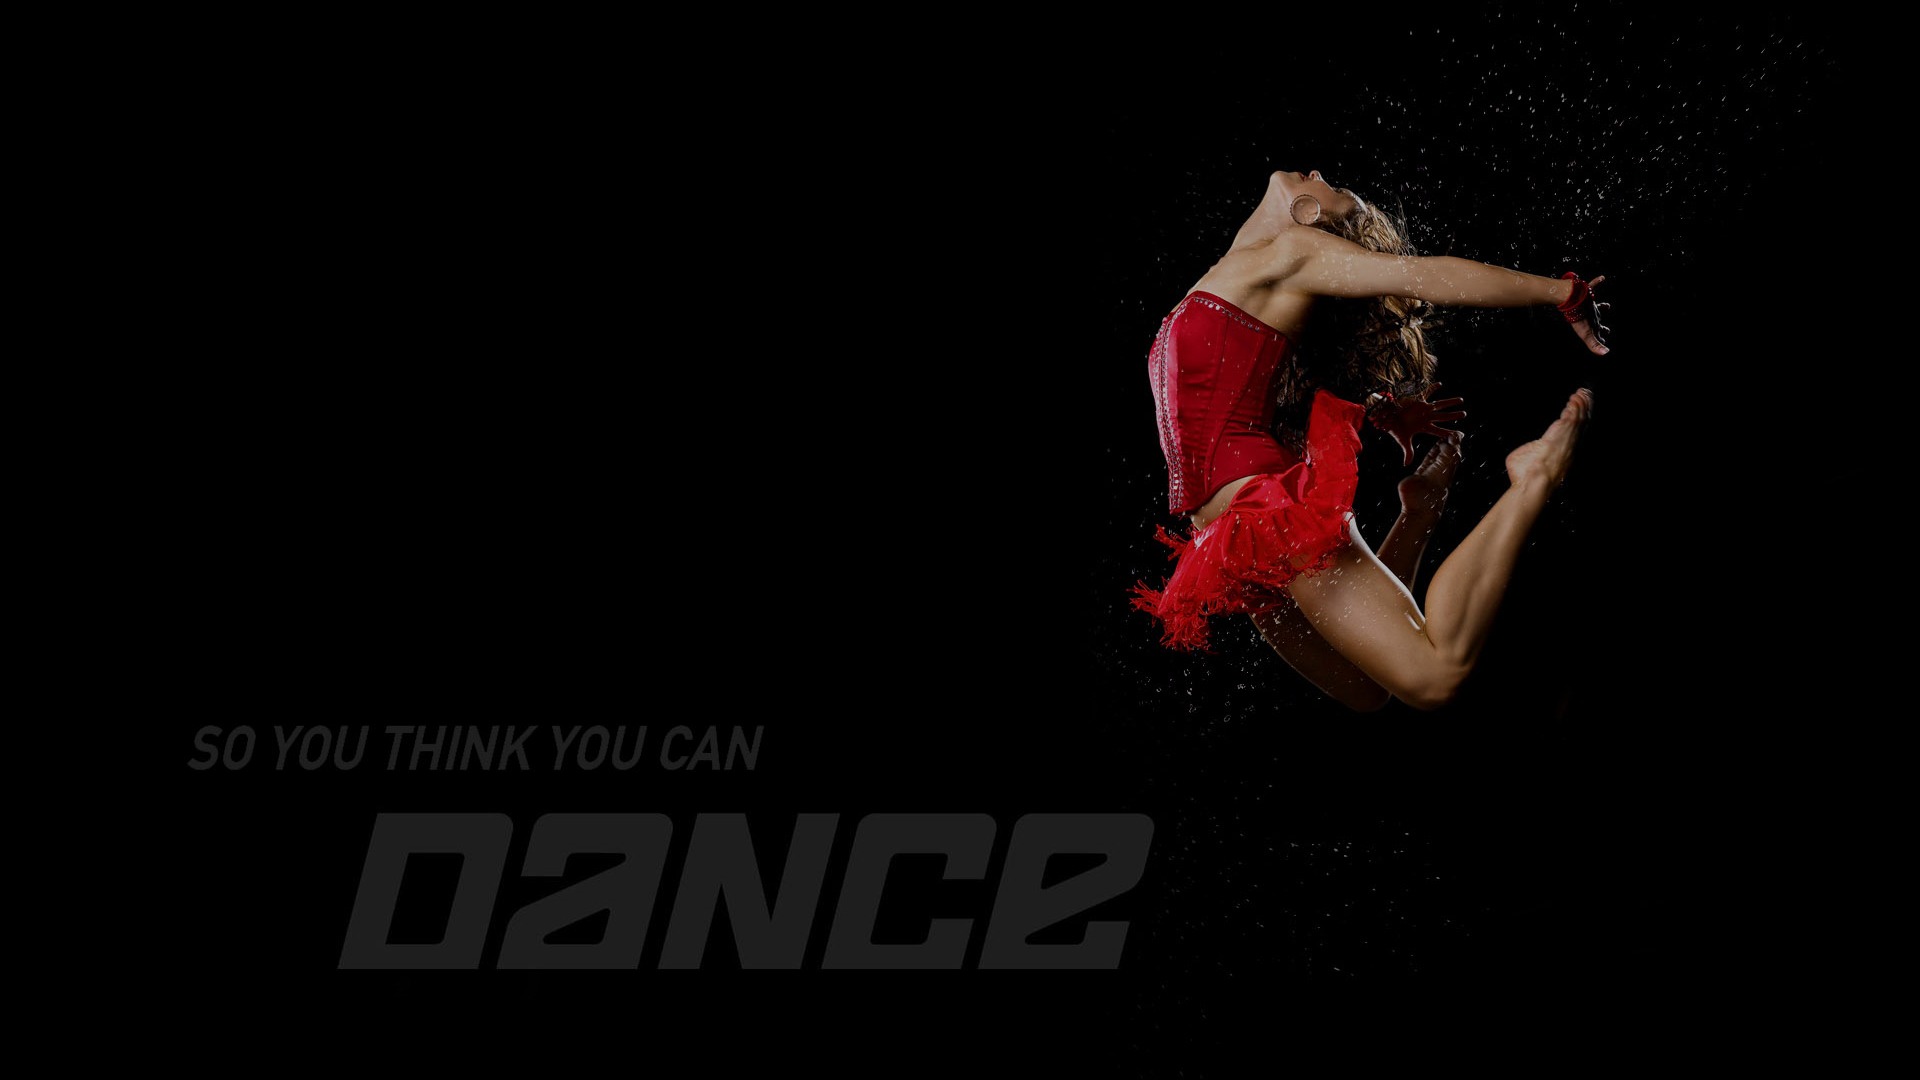 So You Think You Can Dance 舞林争霸 壁纸(二)1 - 1920x1080